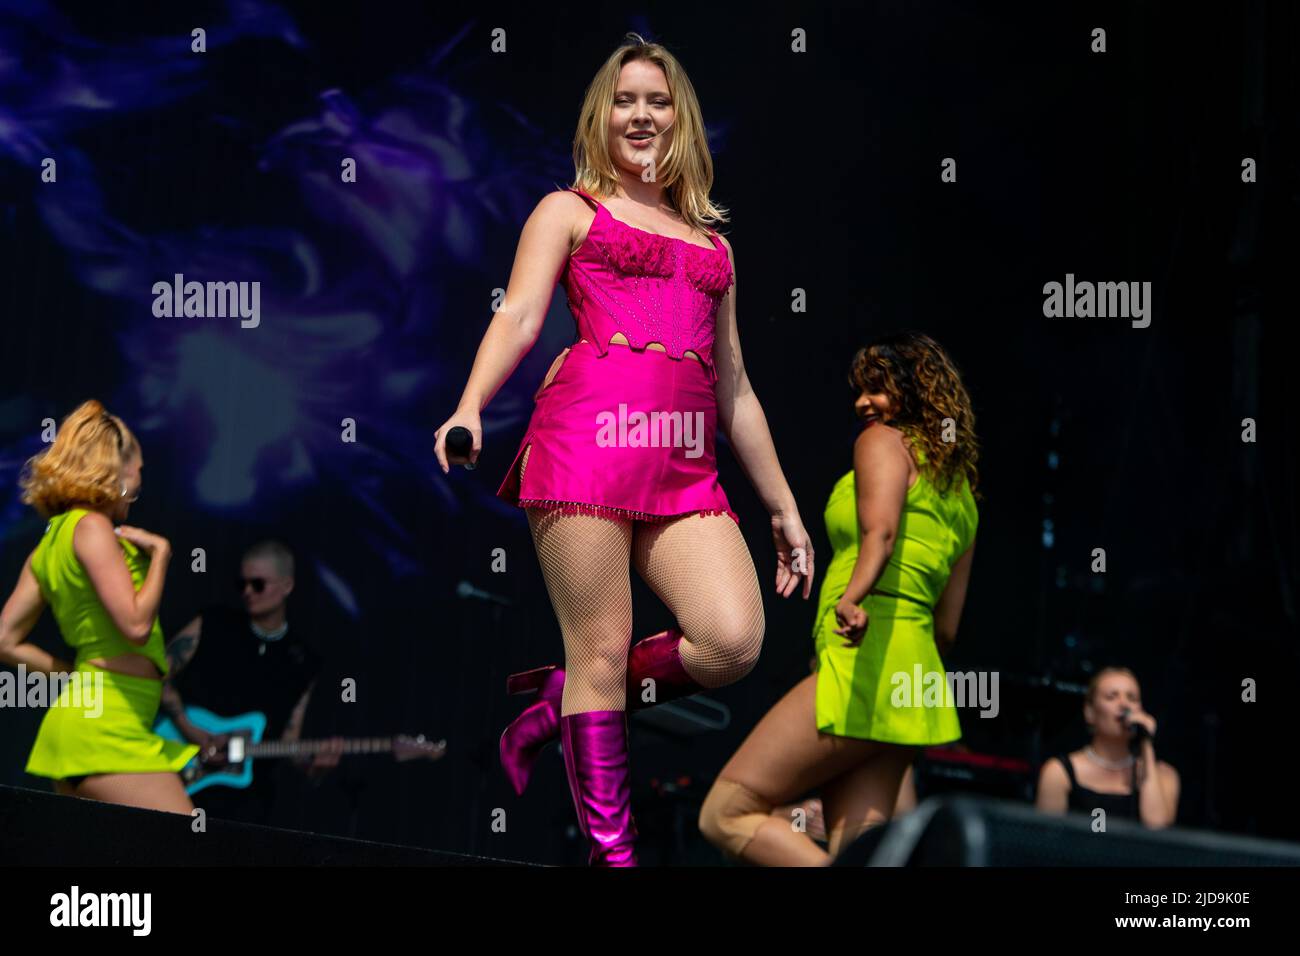 2022-06-19 16:36:40 LANDGRAAF - The Swedish pop singer Zara Larsson will  perform during the third day of the Pinkpop music festival. ANP PAUL BERGEN  netherlands out - belgium out Stock Photo - Alamy